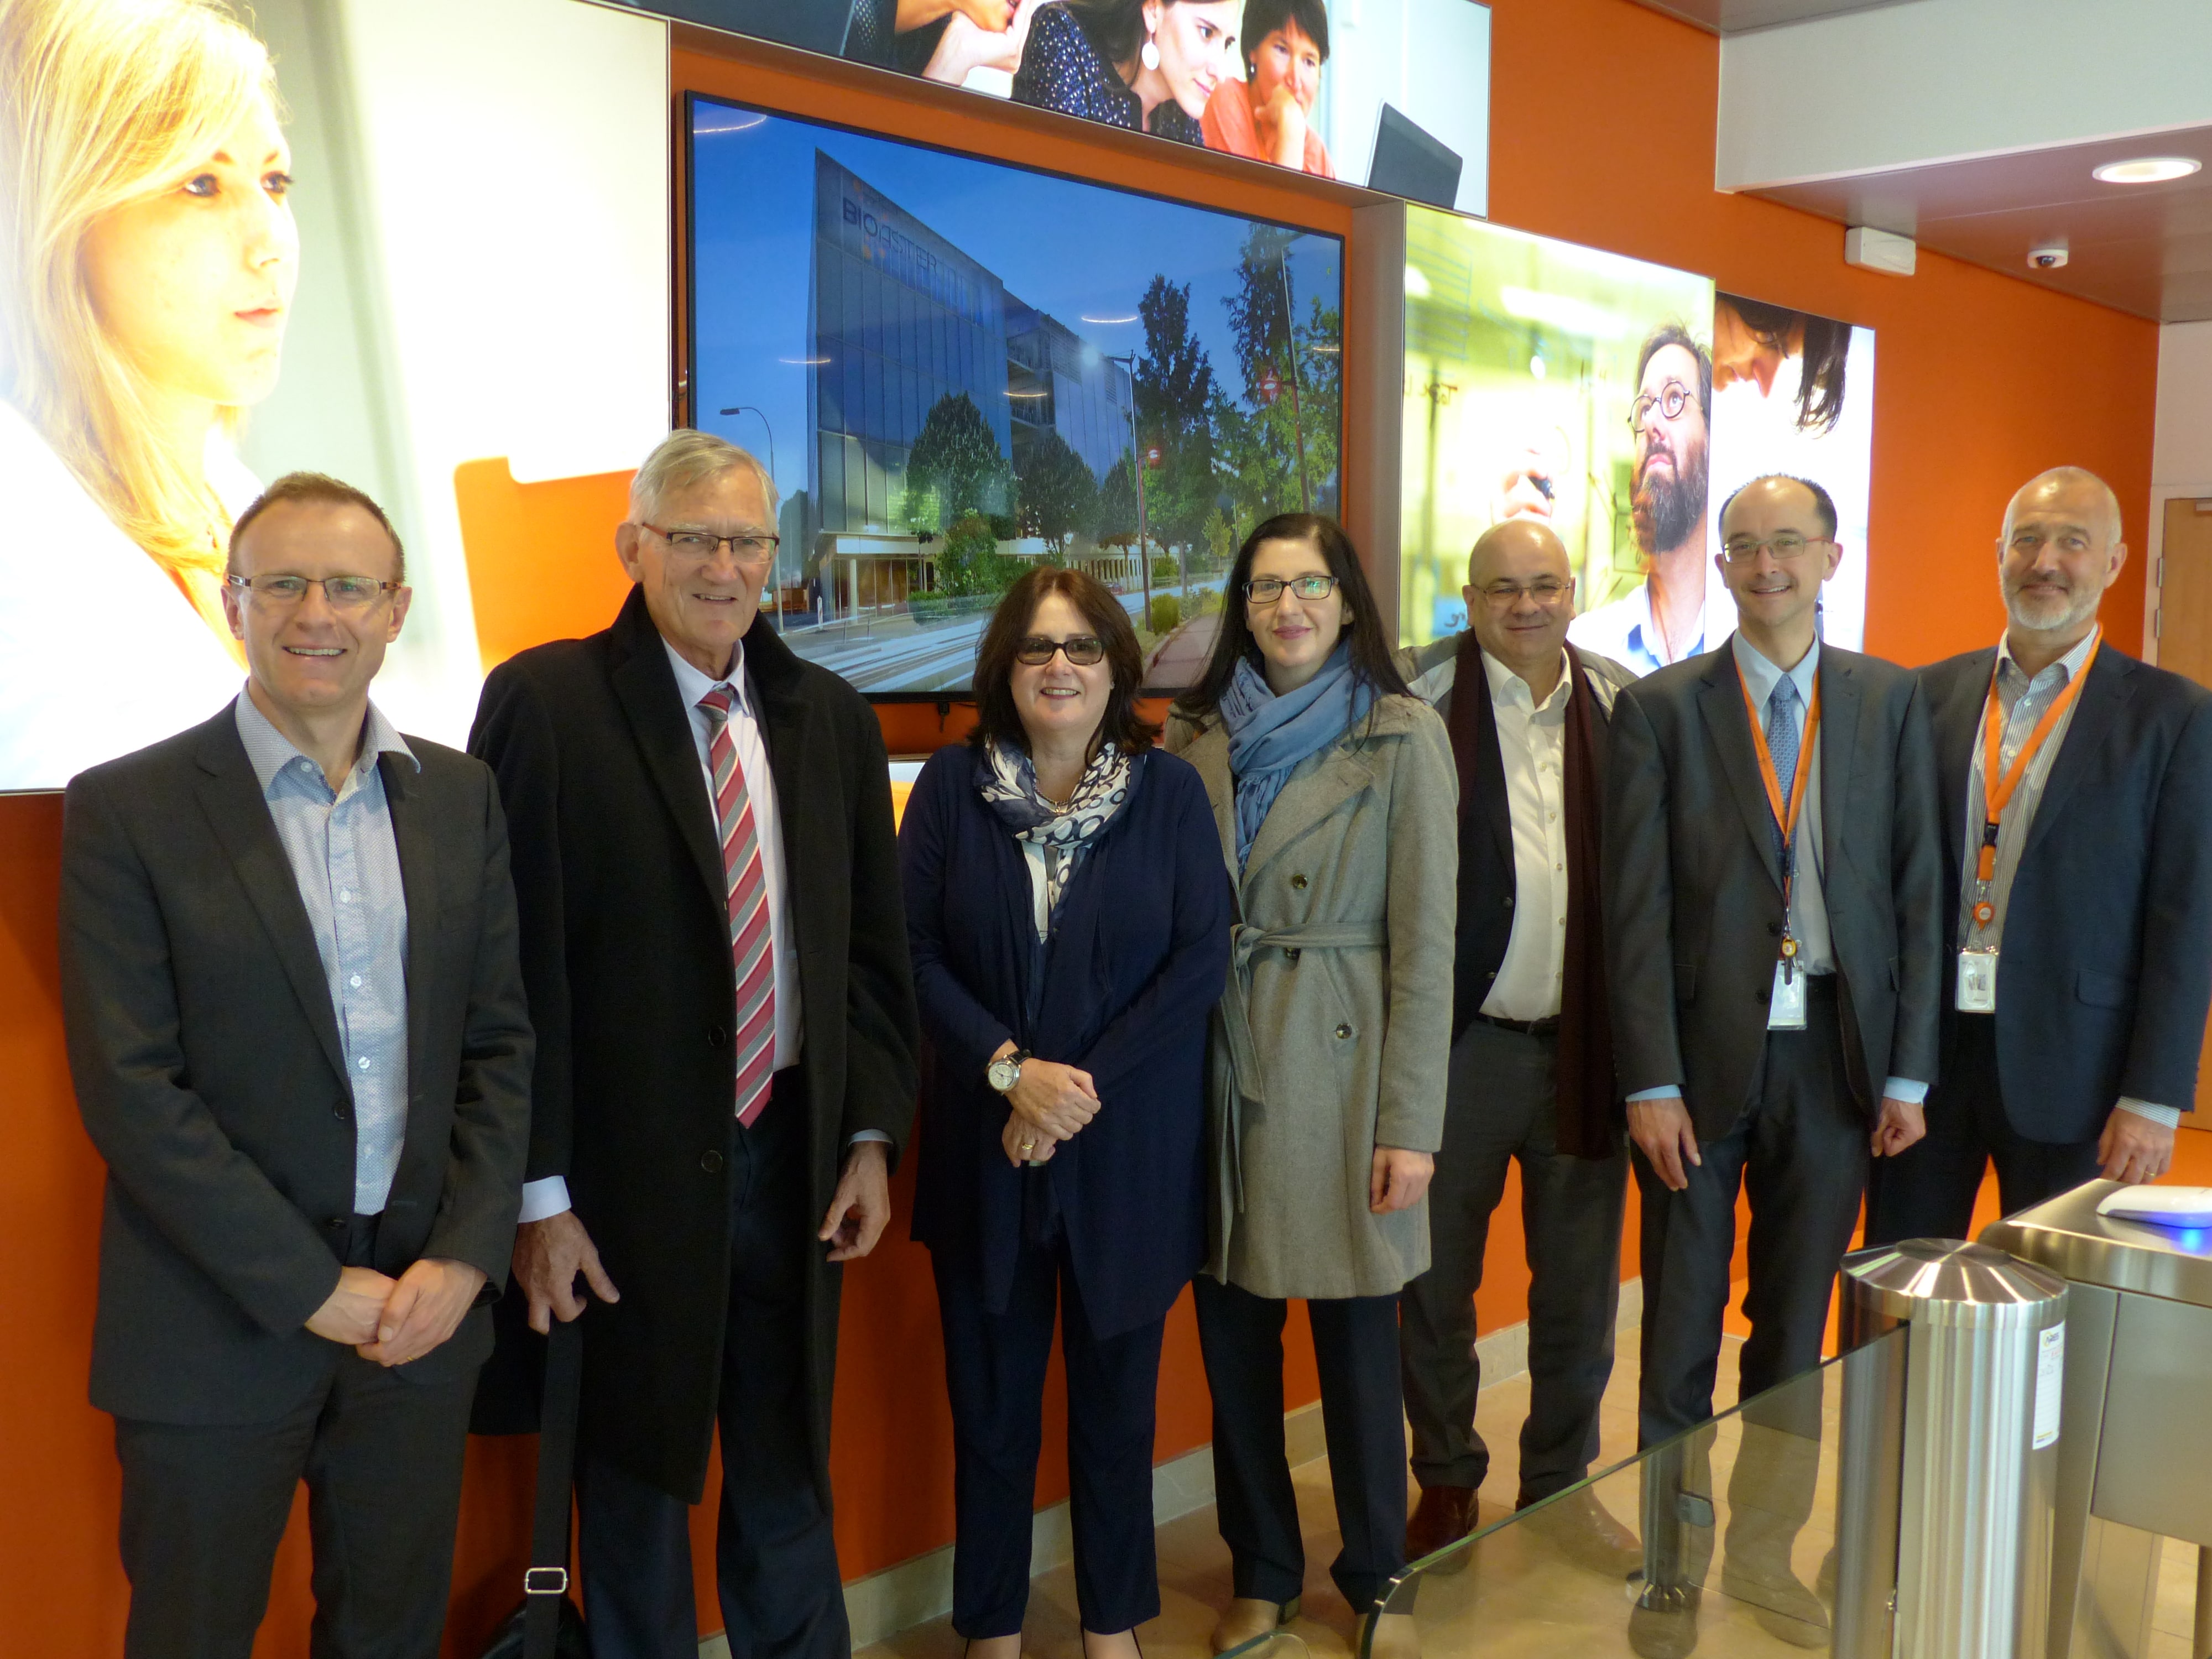 BIOASTER welcomes the Australian government's Innovation Delegation.